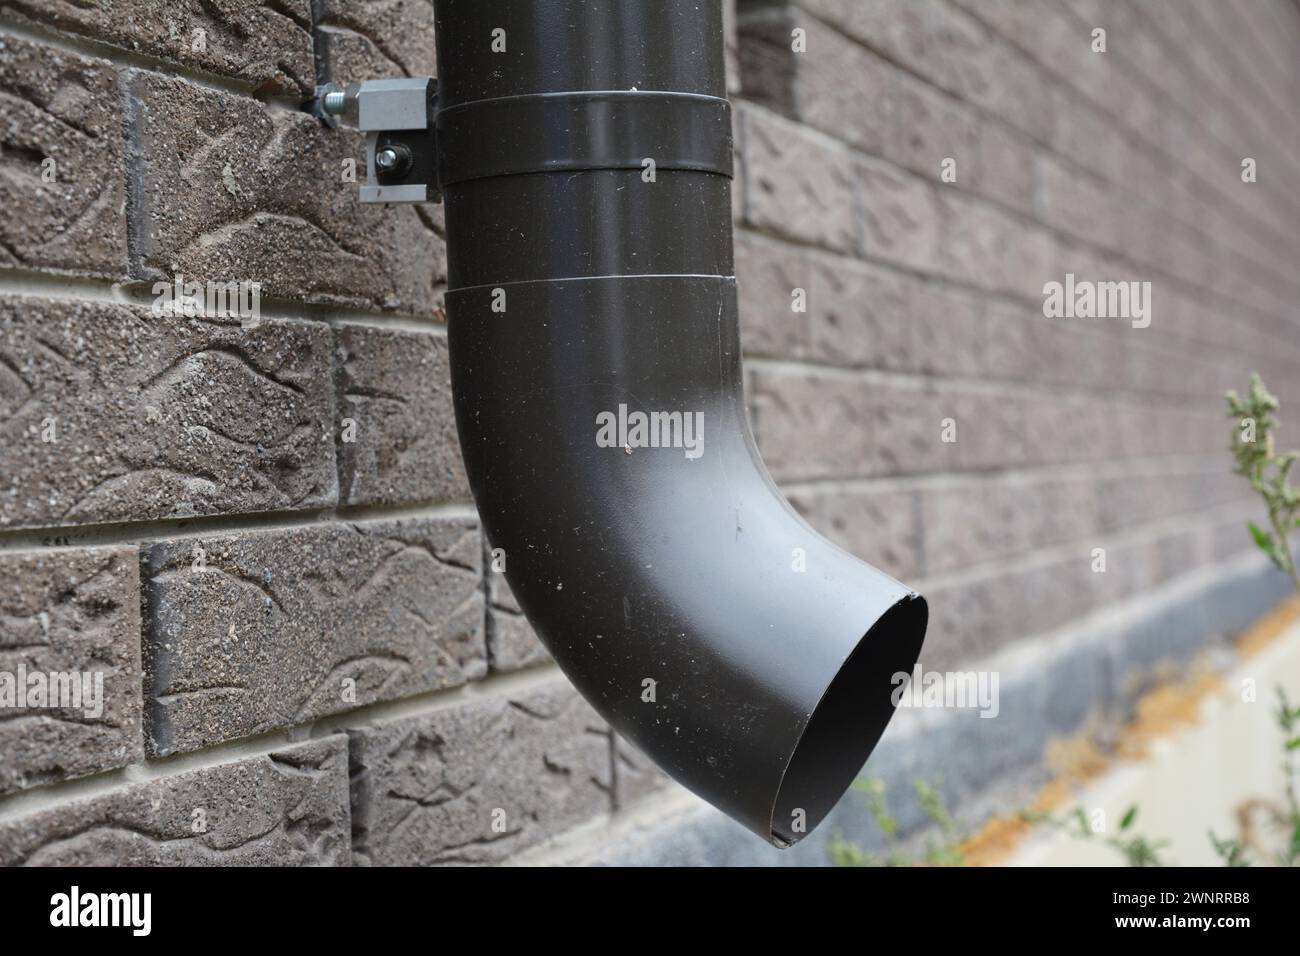 Metal rain gutter downspout pipe with anchor bolt holder on the house brick wall. Stock Photo